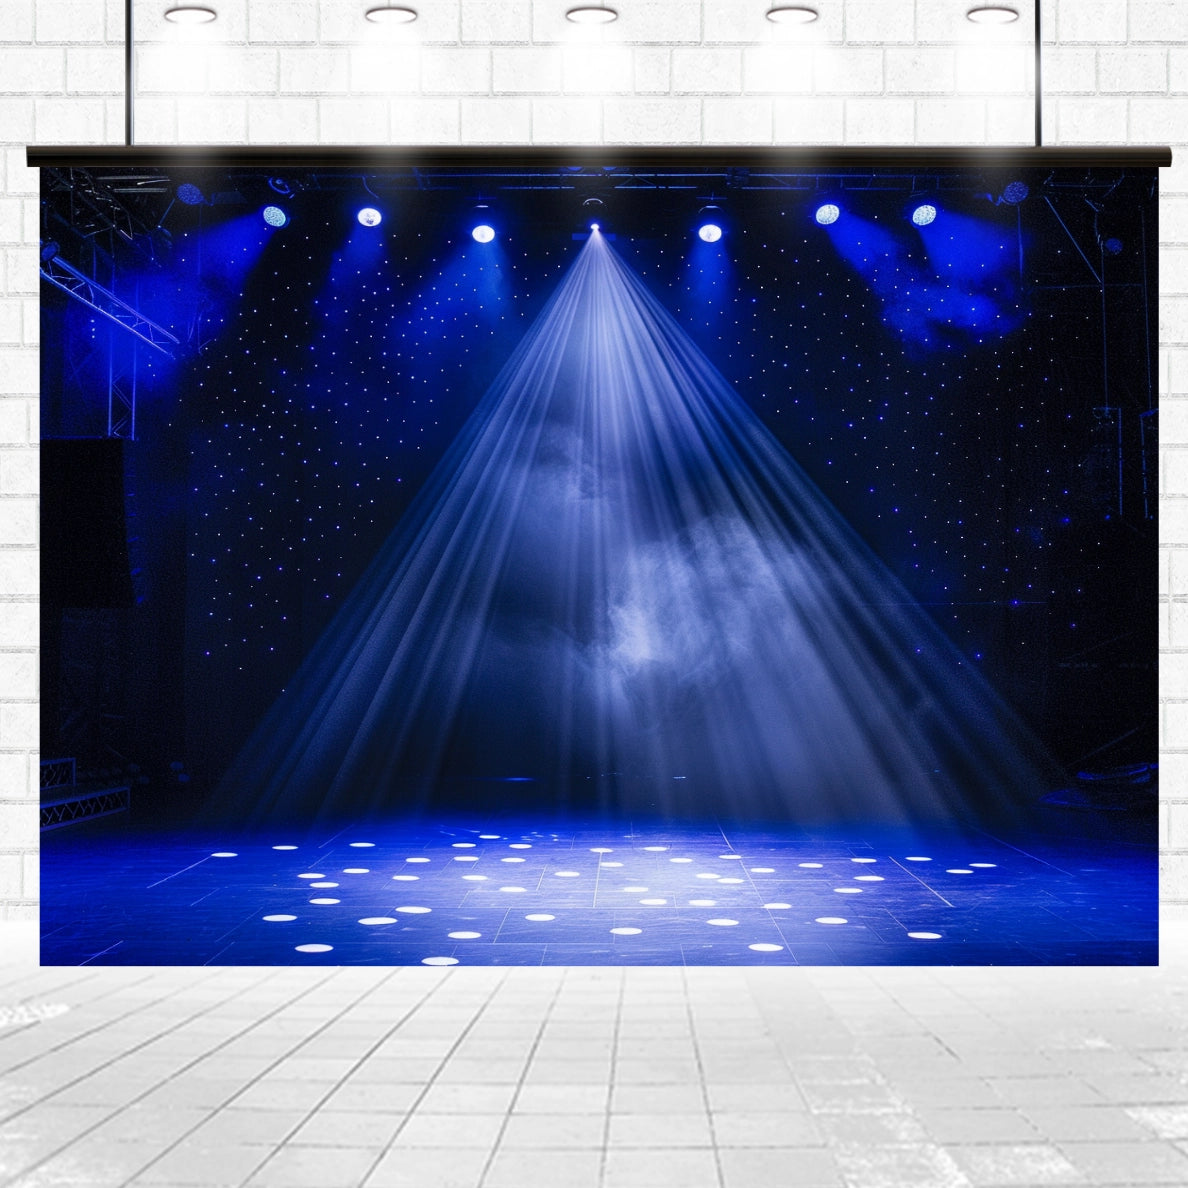 A stage lit with blue spotlights and a bright overhead beam against the ideasbackdrop 7x5FT Stage Spotlight Backdrop Concert Gloomy Night Scenic Photography Background Portrait Studio Props.